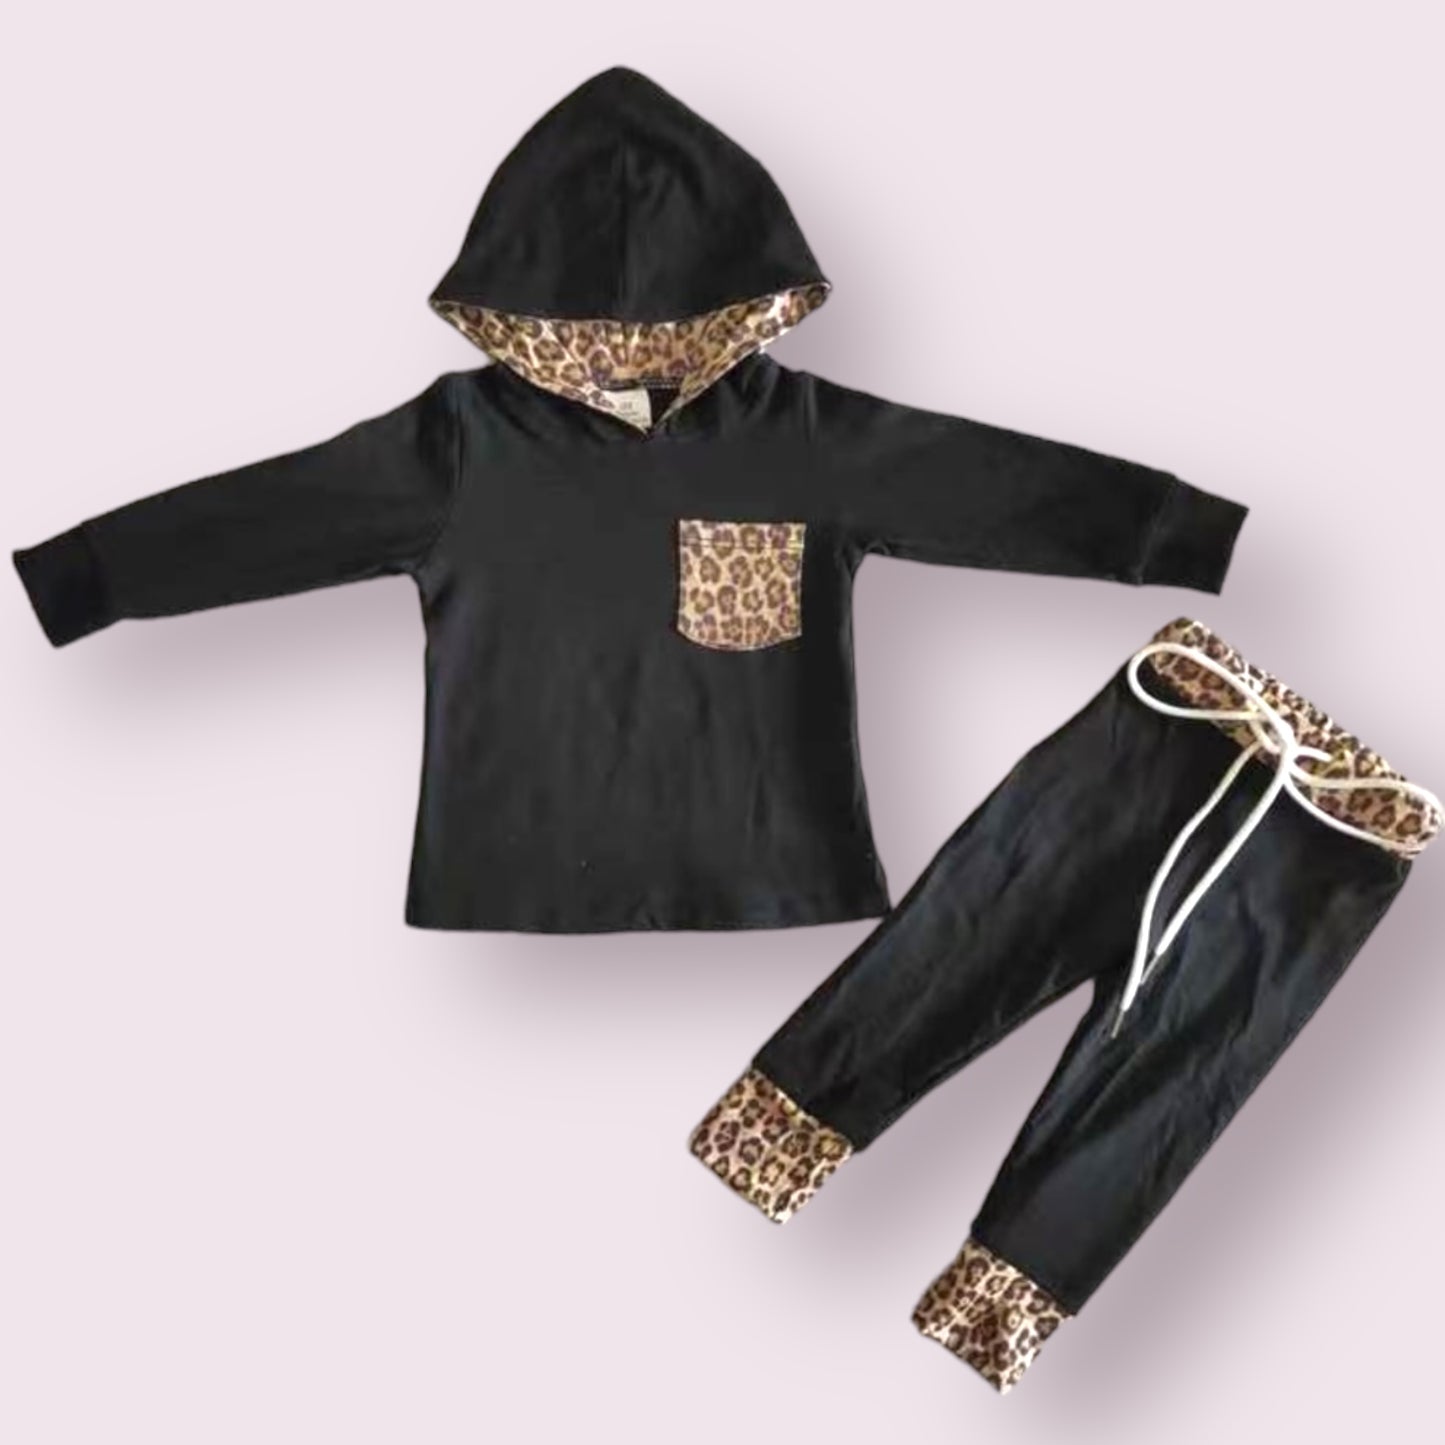 Black & Leopard Hooded Outfit